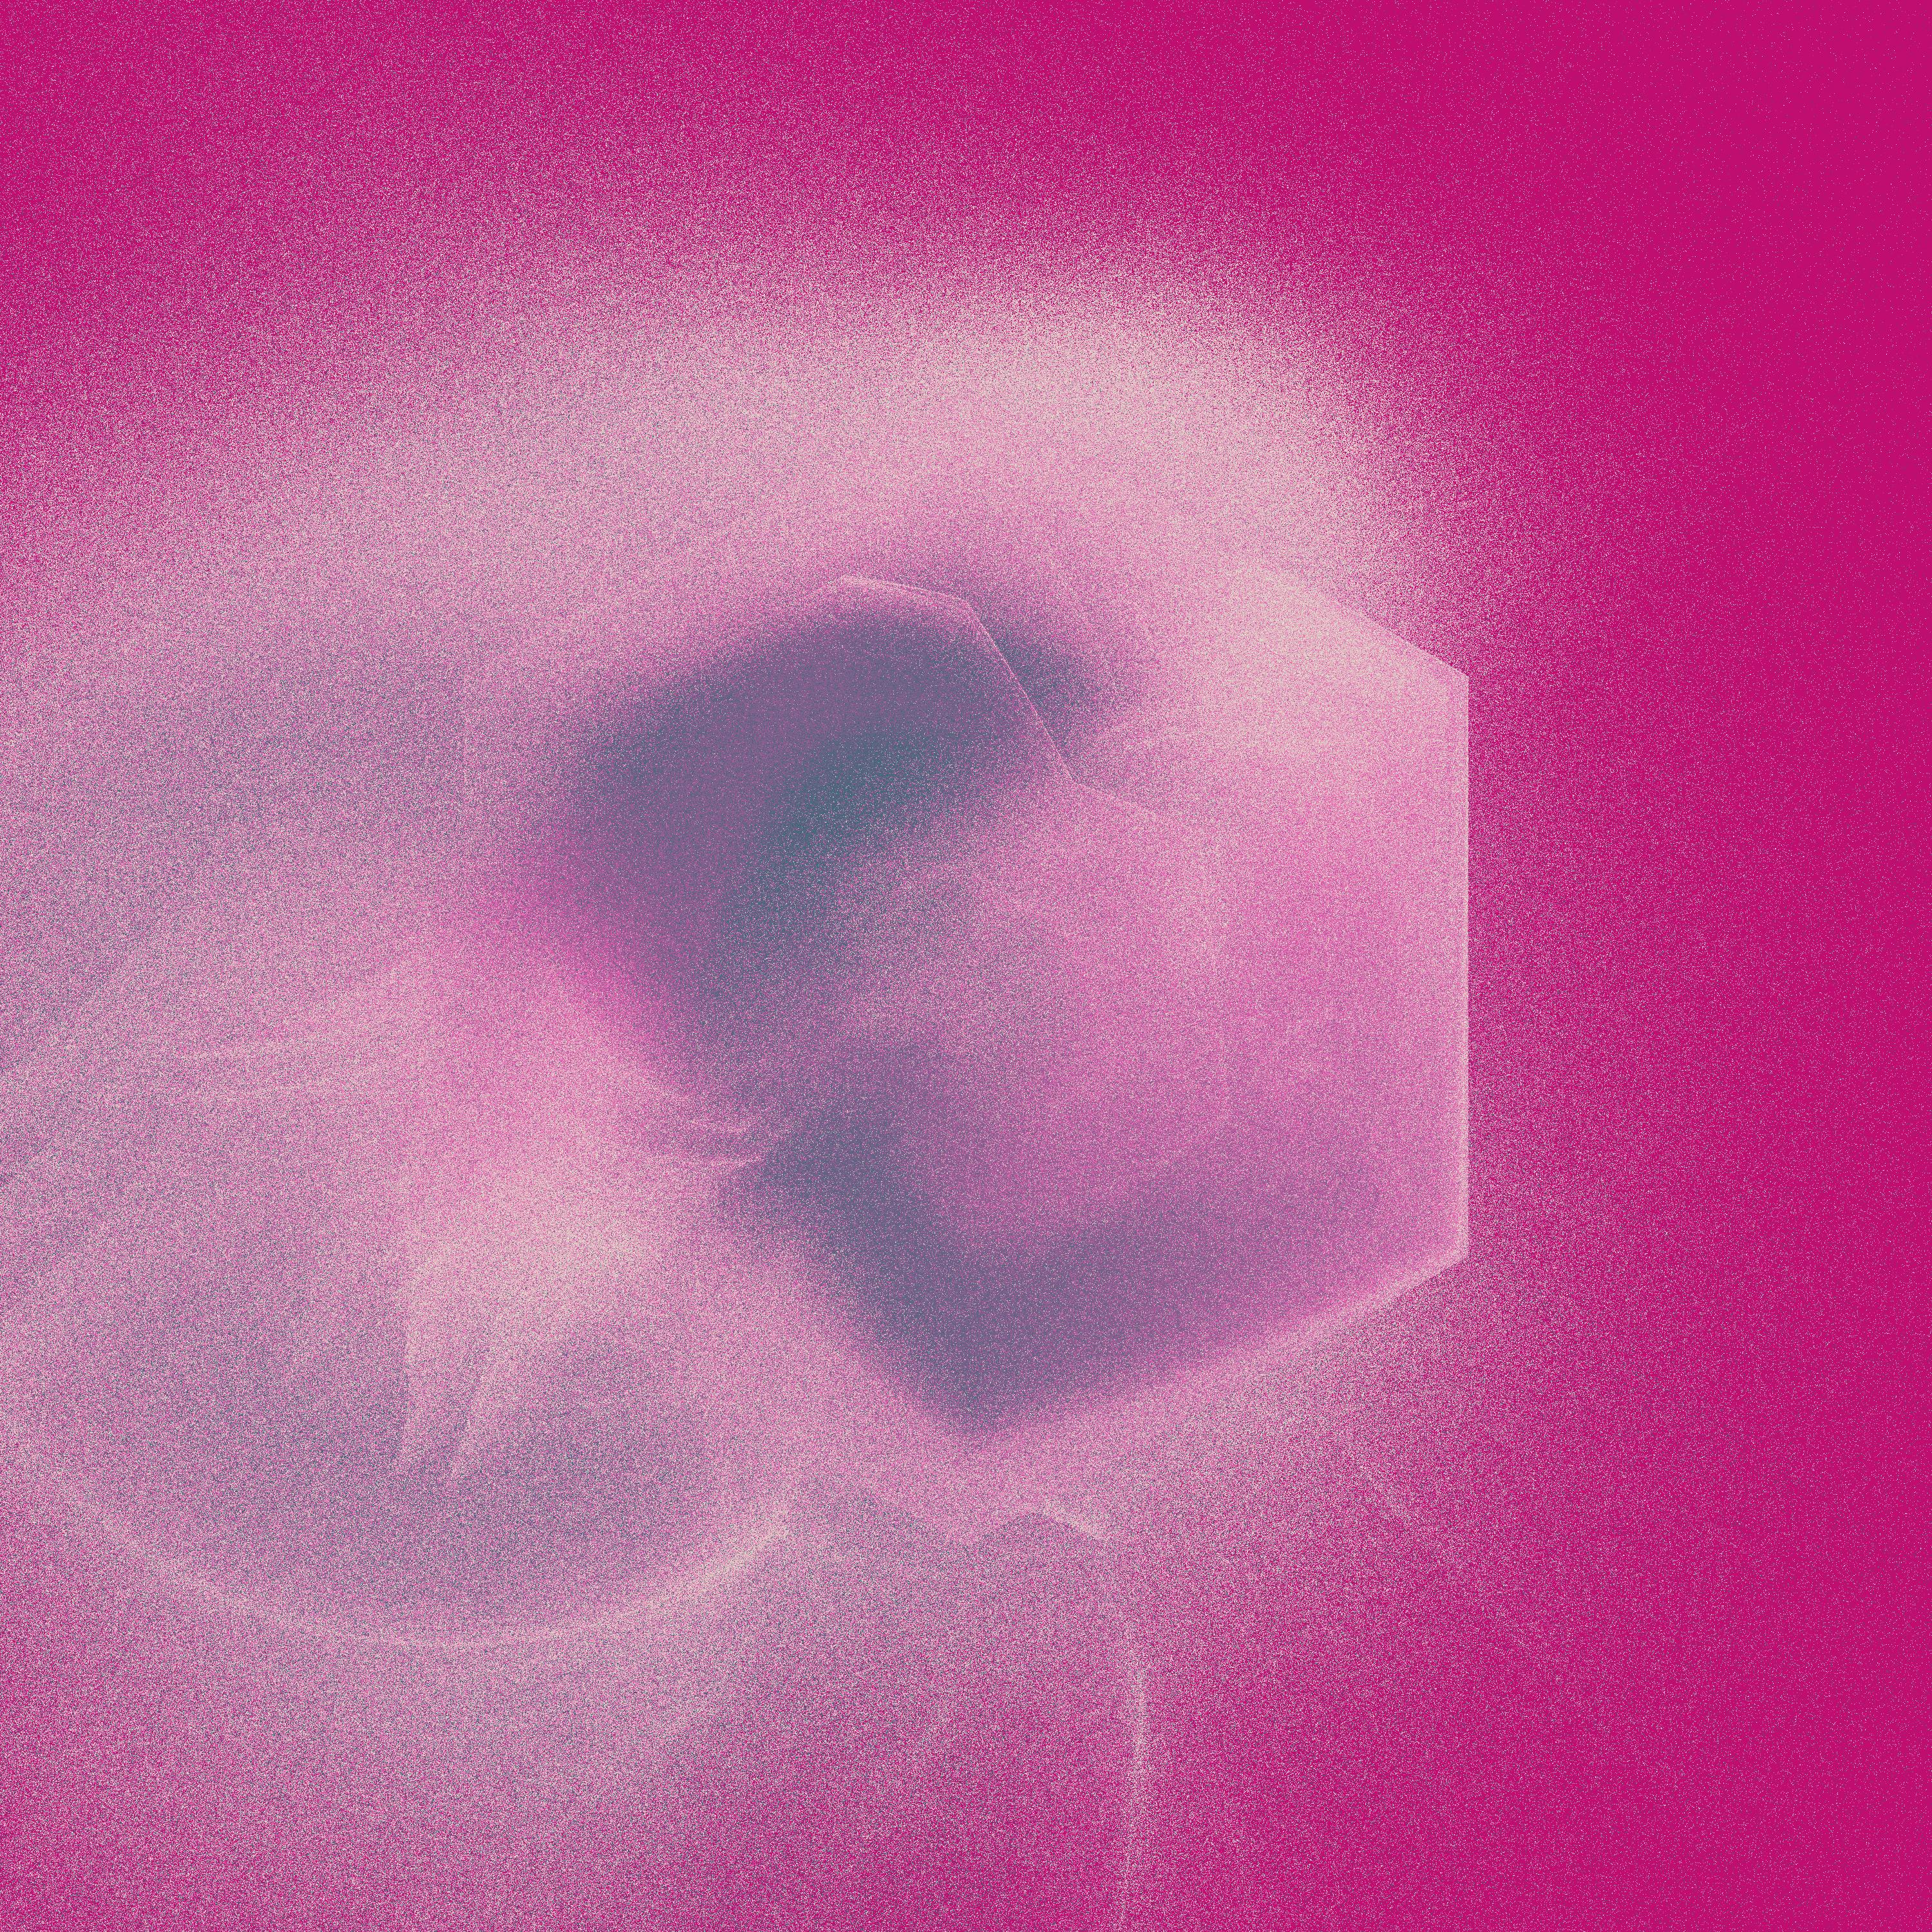 swirling grainy textures in a roughly hexagonal shape, rendered in pink, purple and white, against a  purple background, with noisy speckling escaping the hexagonal region on the left hand side.